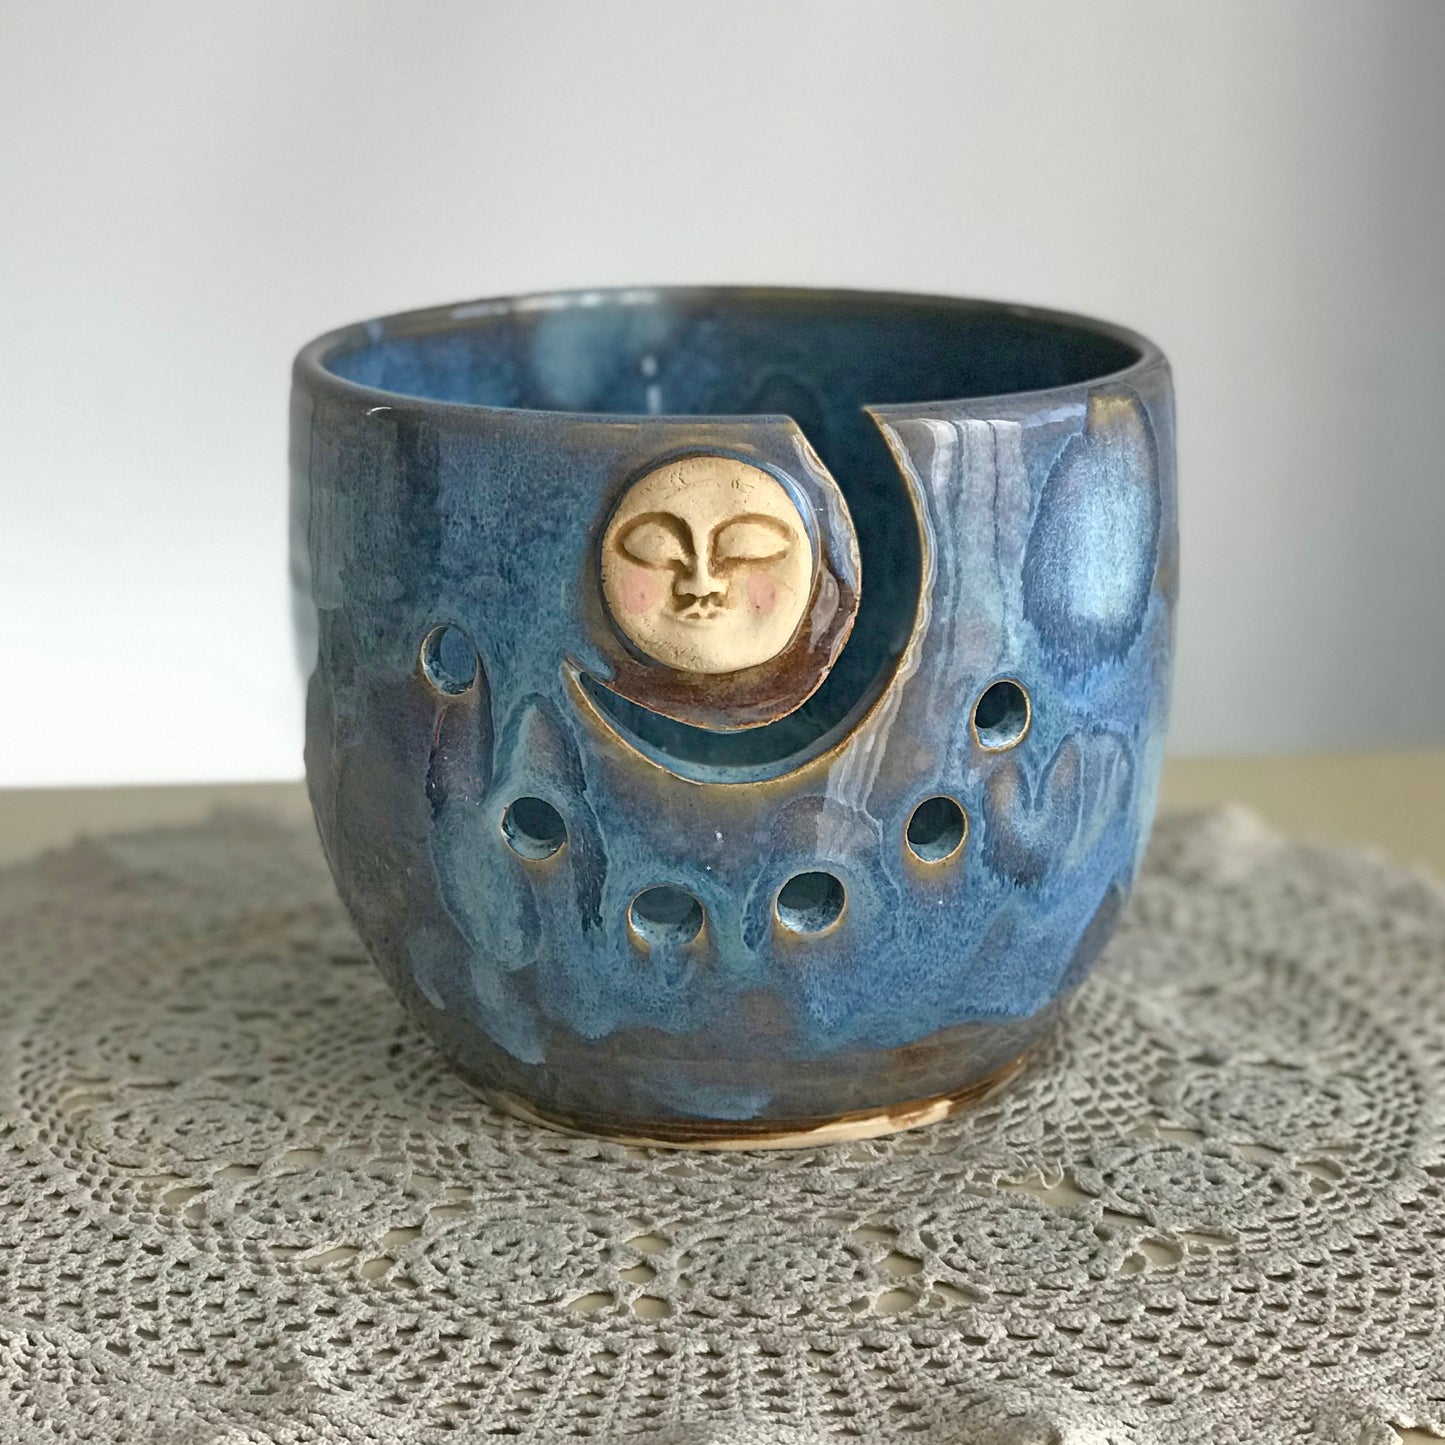 Full Moon Yarn Bowl for Knitting and Crochet - Large